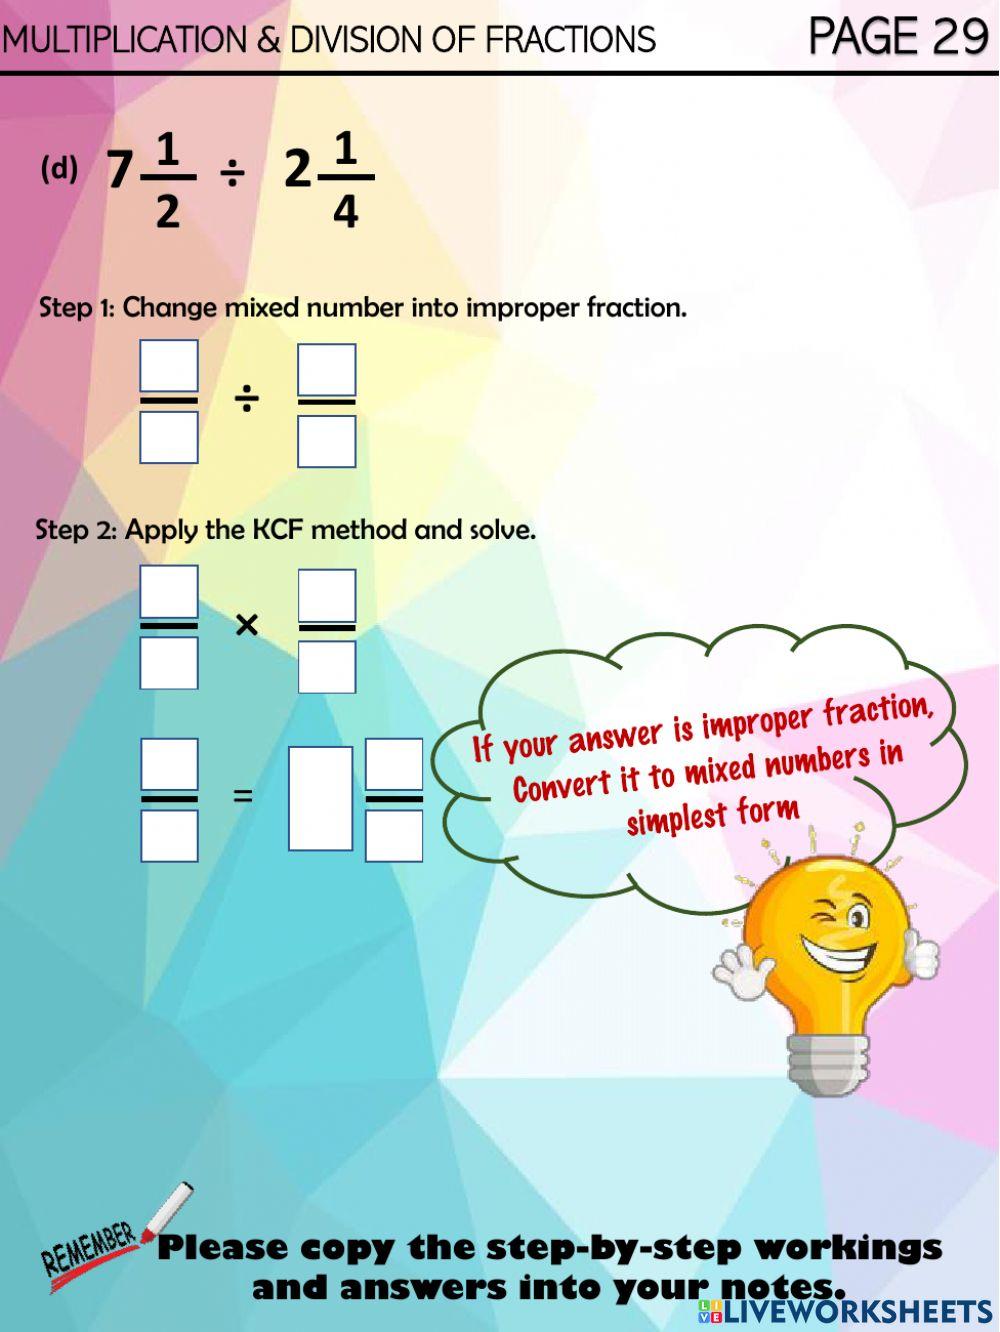 Multiplication and division of fraction